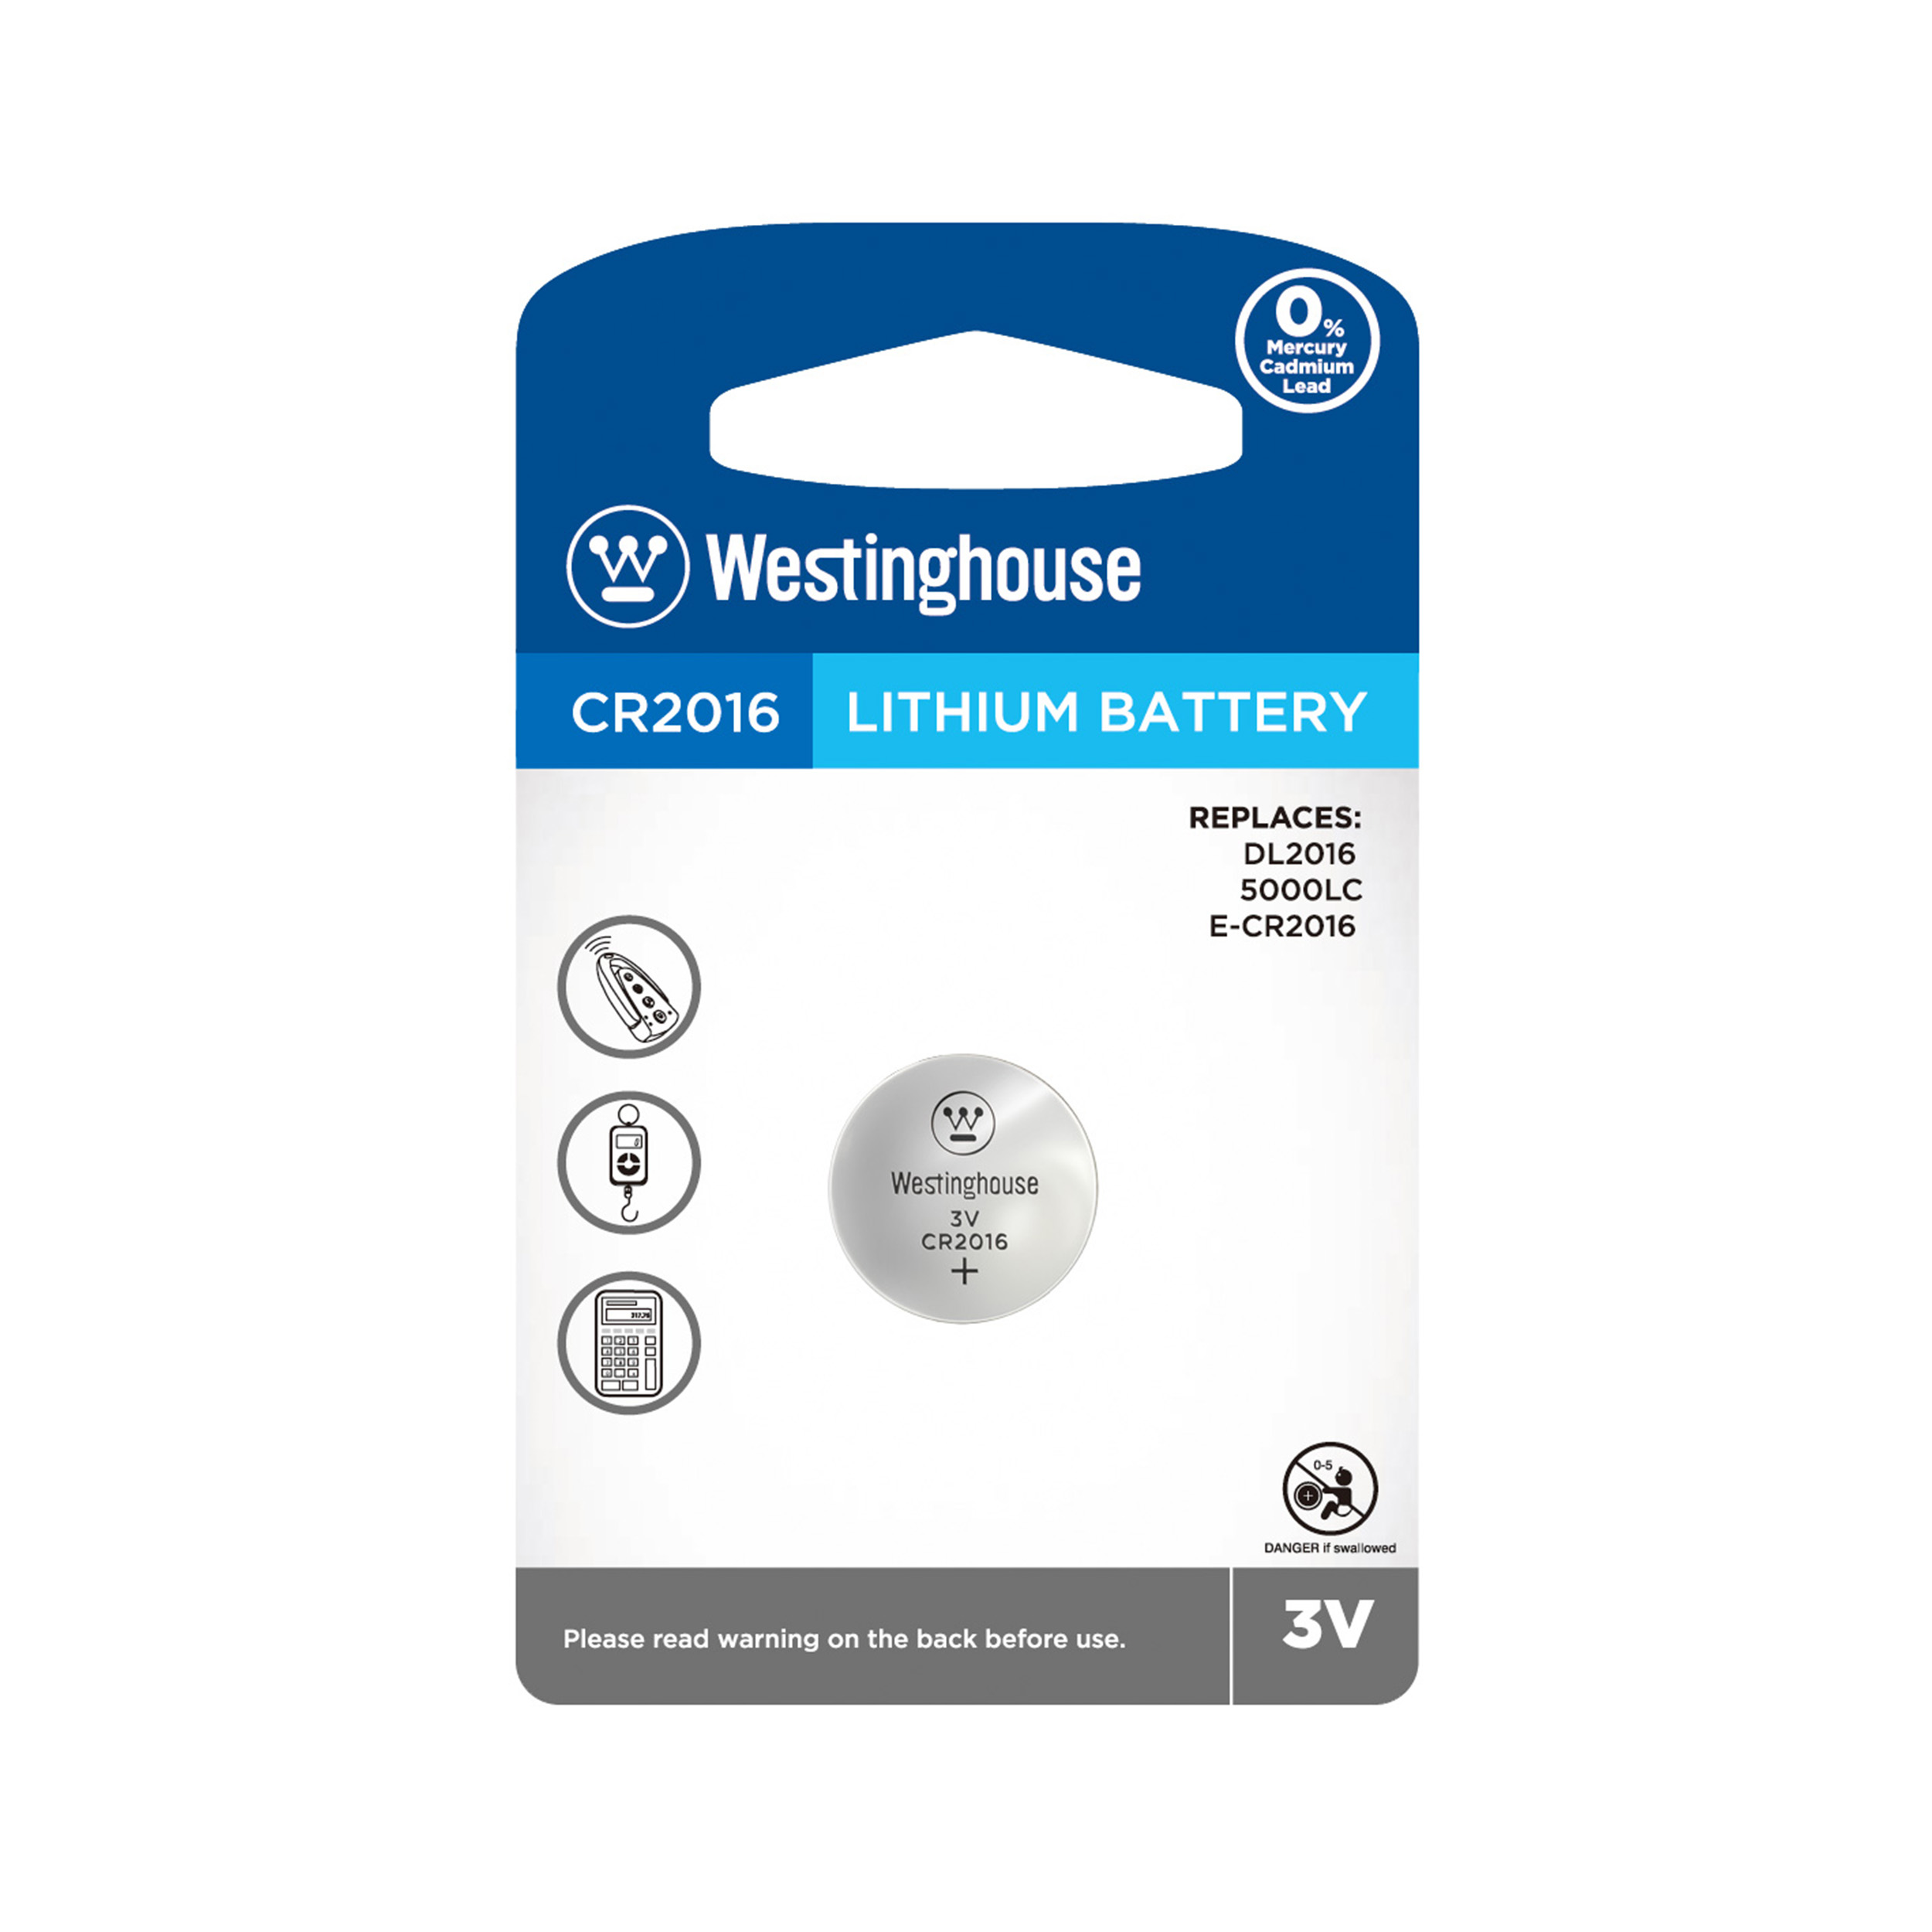 Westinghouse CR2016 3.0V lithium button cell - 1 piece blister